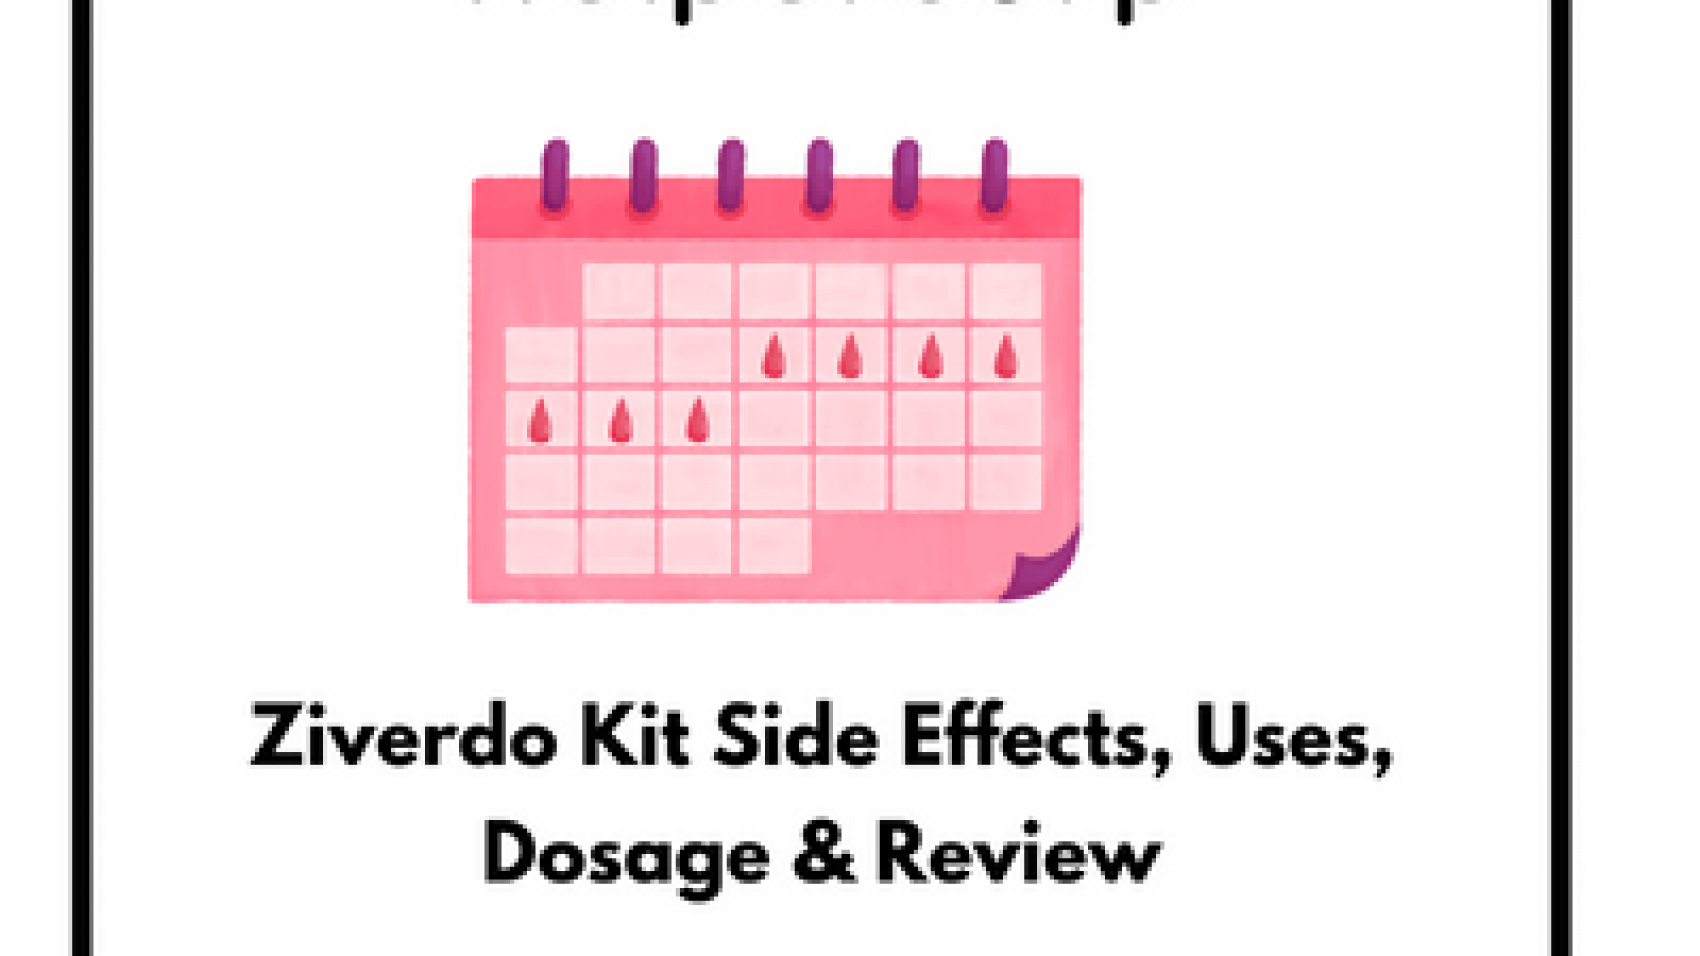 Ziverdo-Kit-Side-Effects-Uses-Dosage-Review